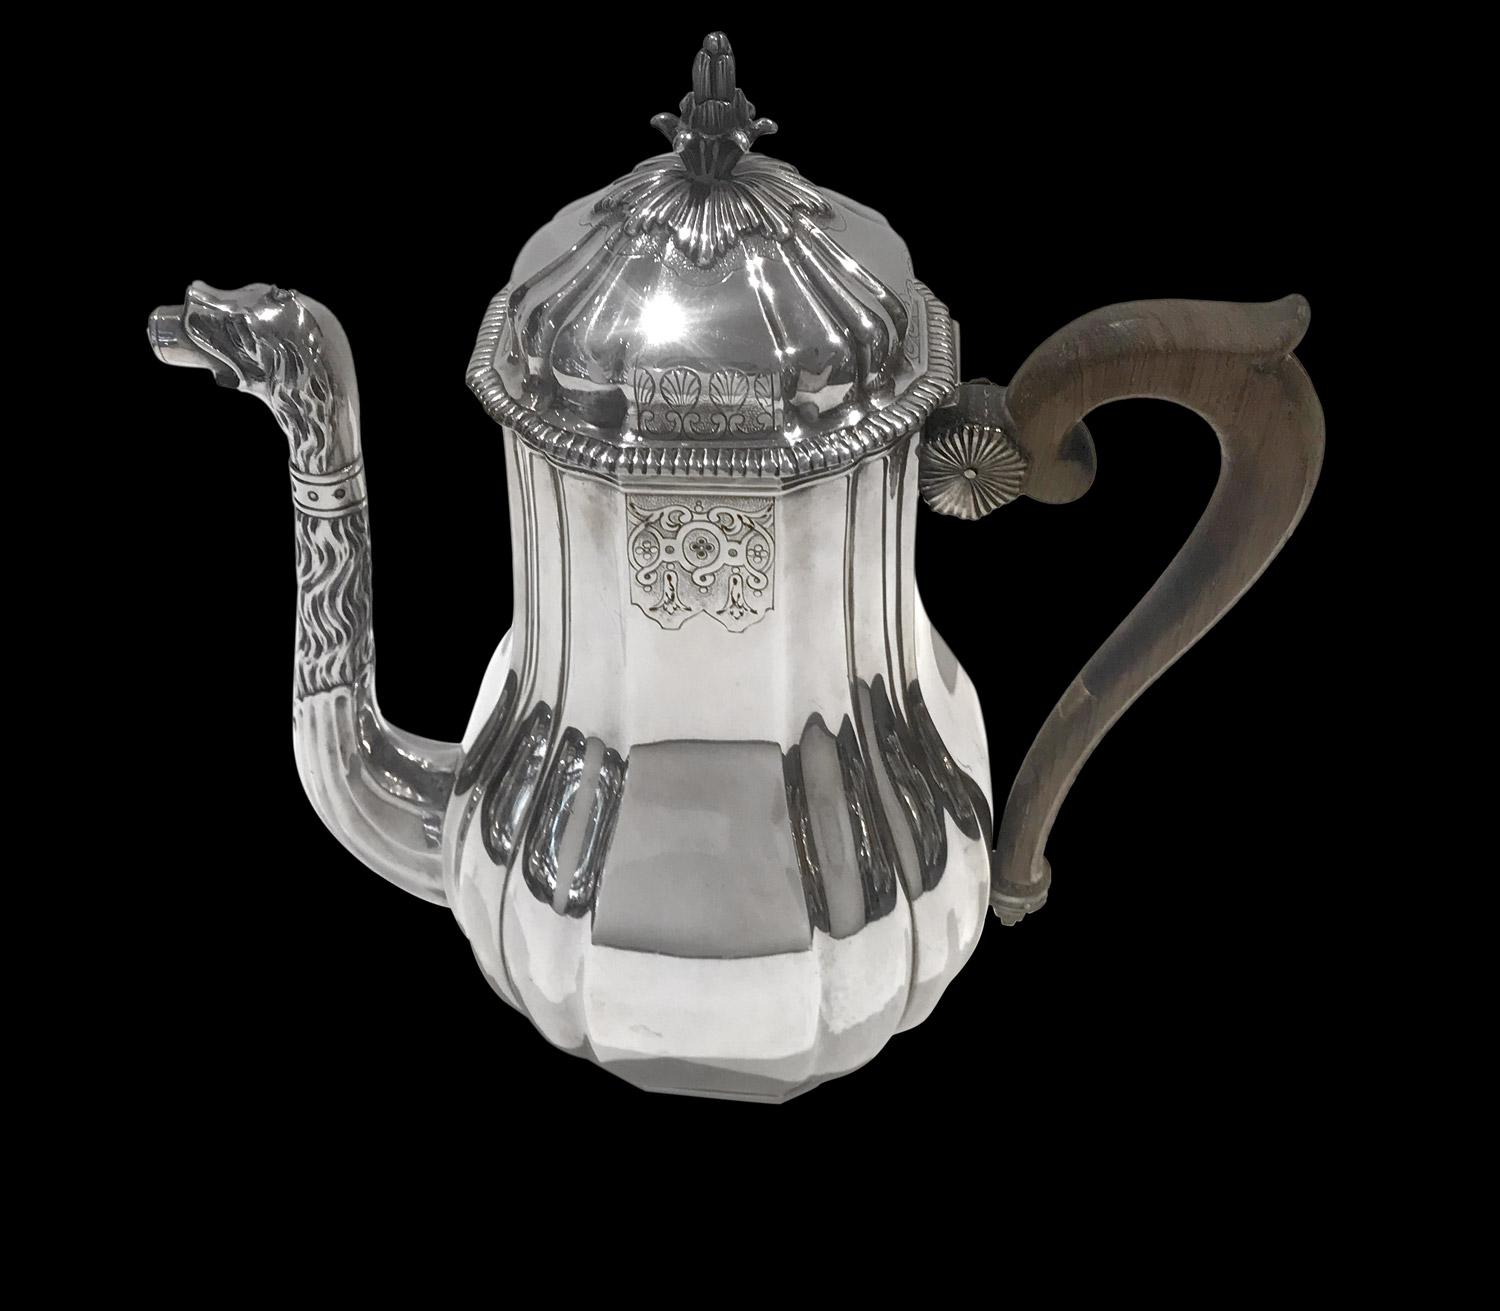 Tea and coffee set in sterling silver by the French silversmith Falkenberg composed of 4 objects: one teapot, one coffee pot, one sugar pot and a milk pot.
Pieces are in pear-shaped form with ribbing. Tea-pot and coffee pot have a curved dog-shaped